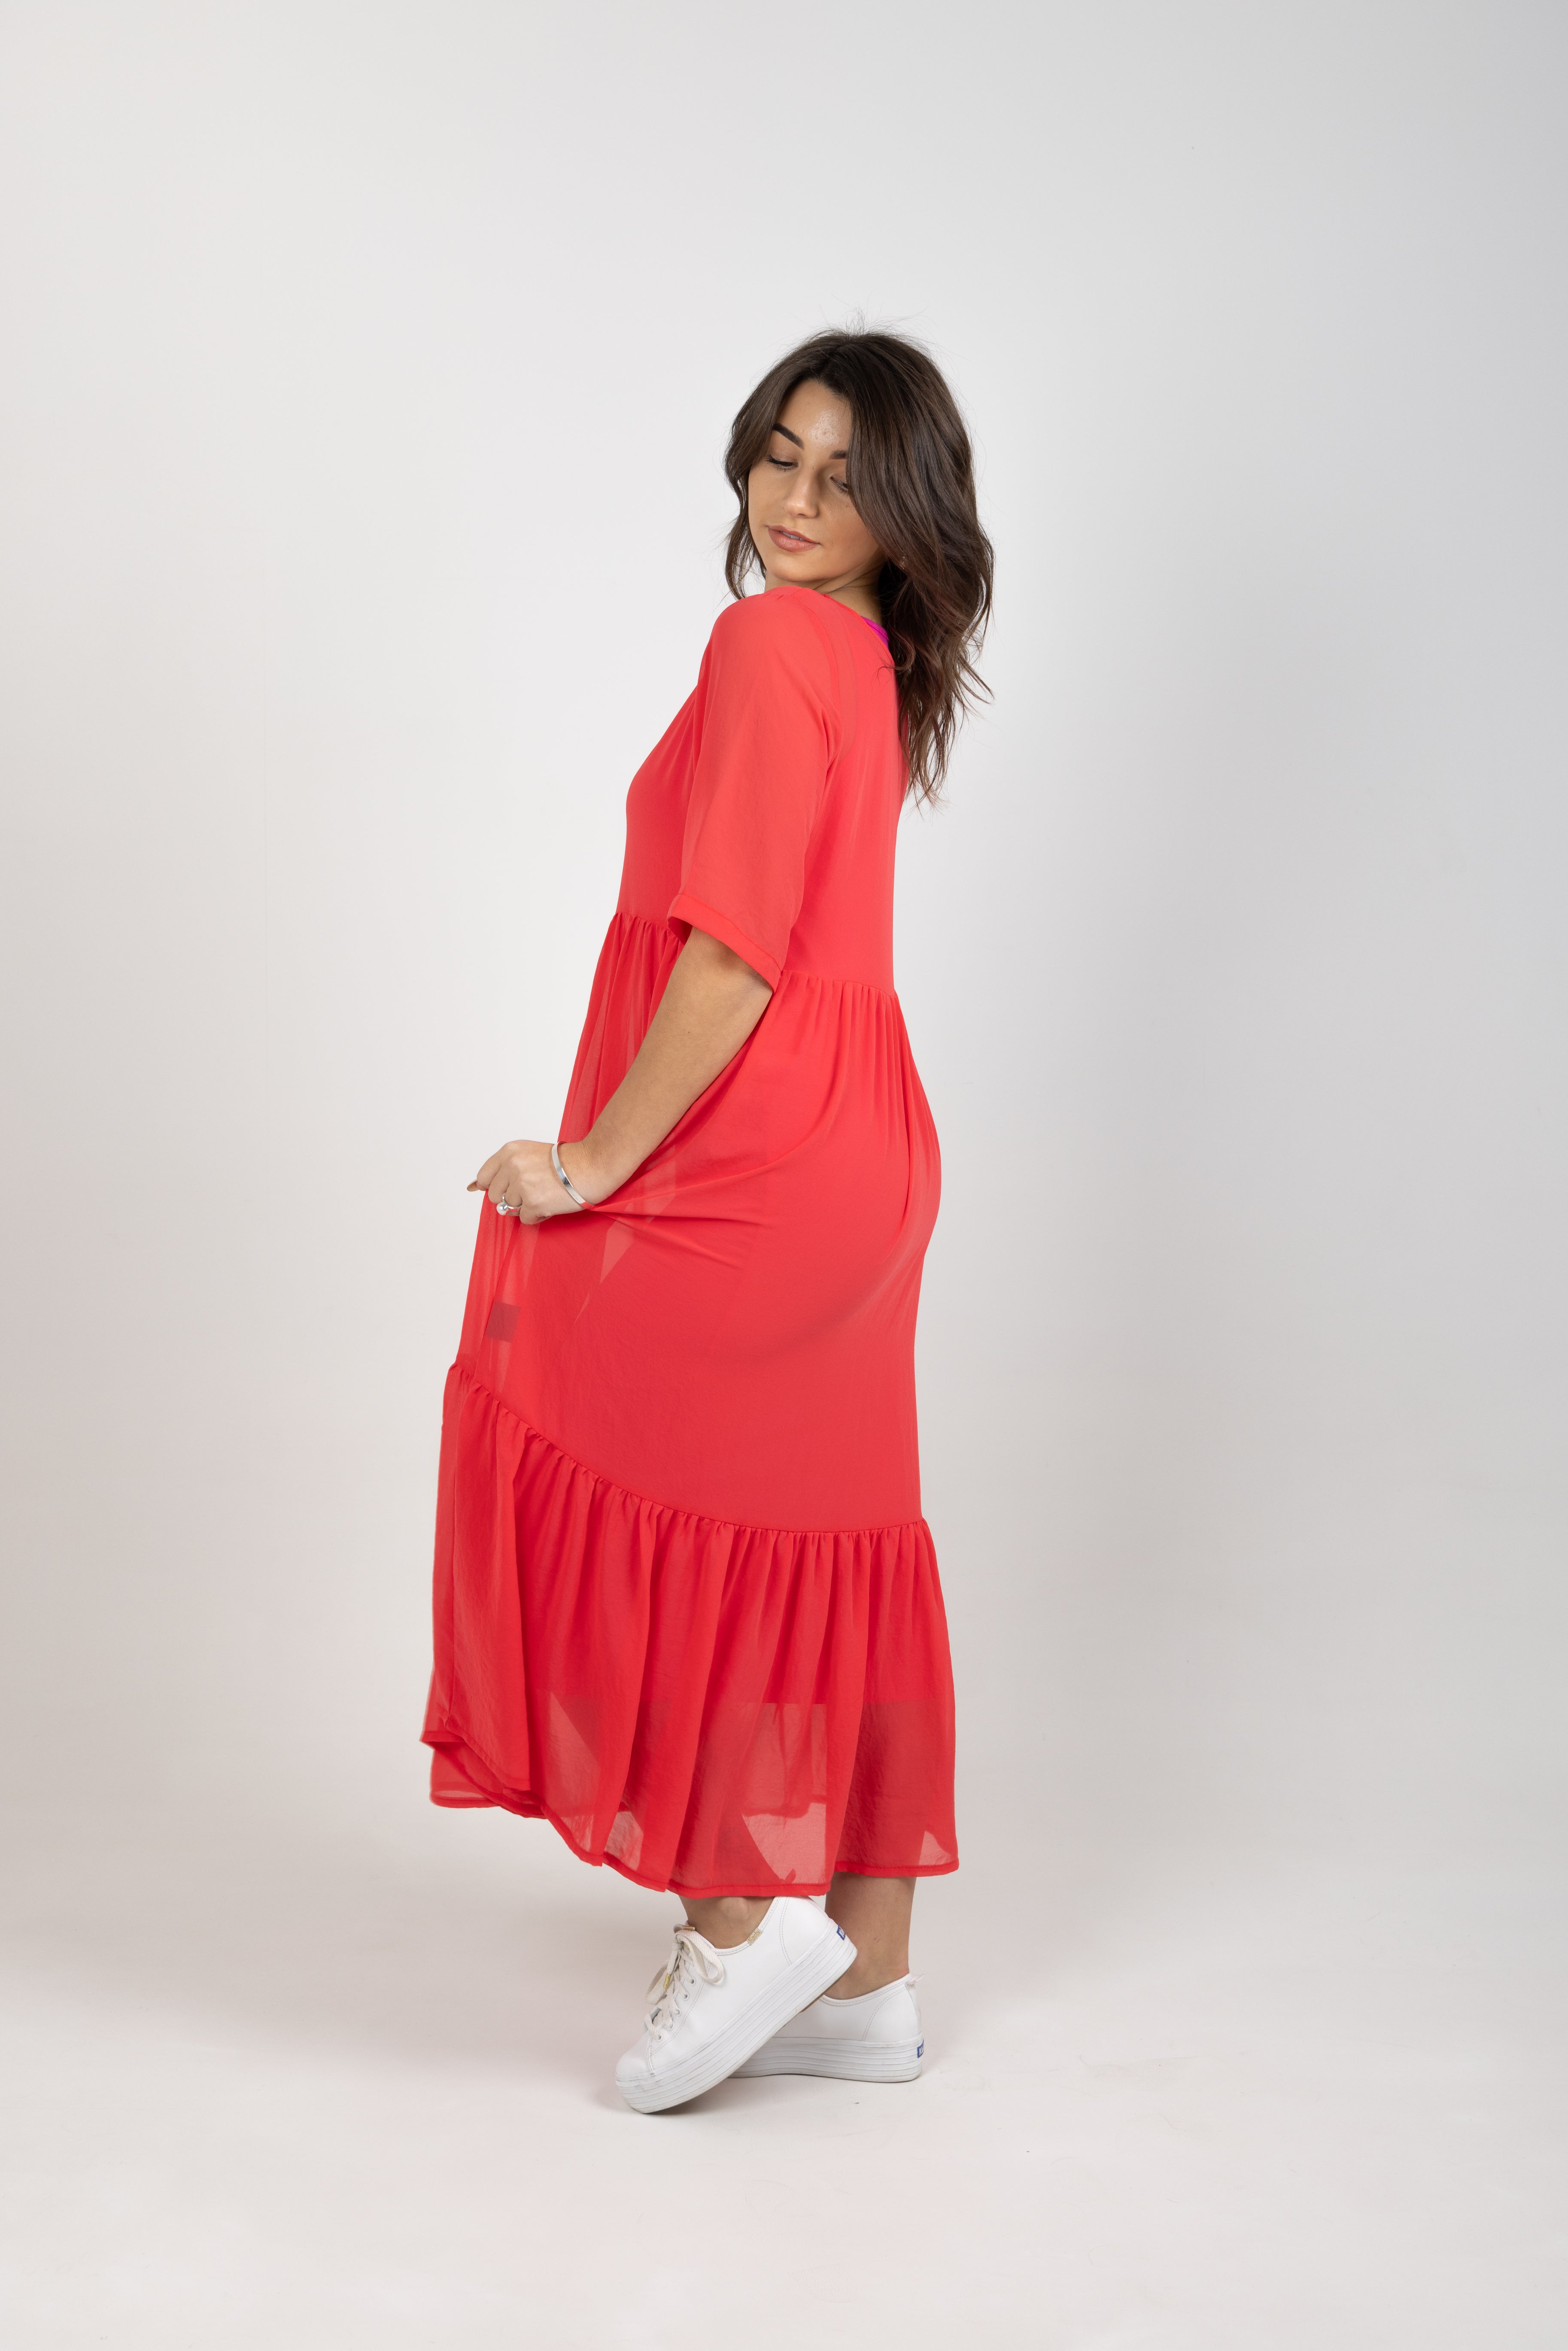 RUBY DRESS CORAL